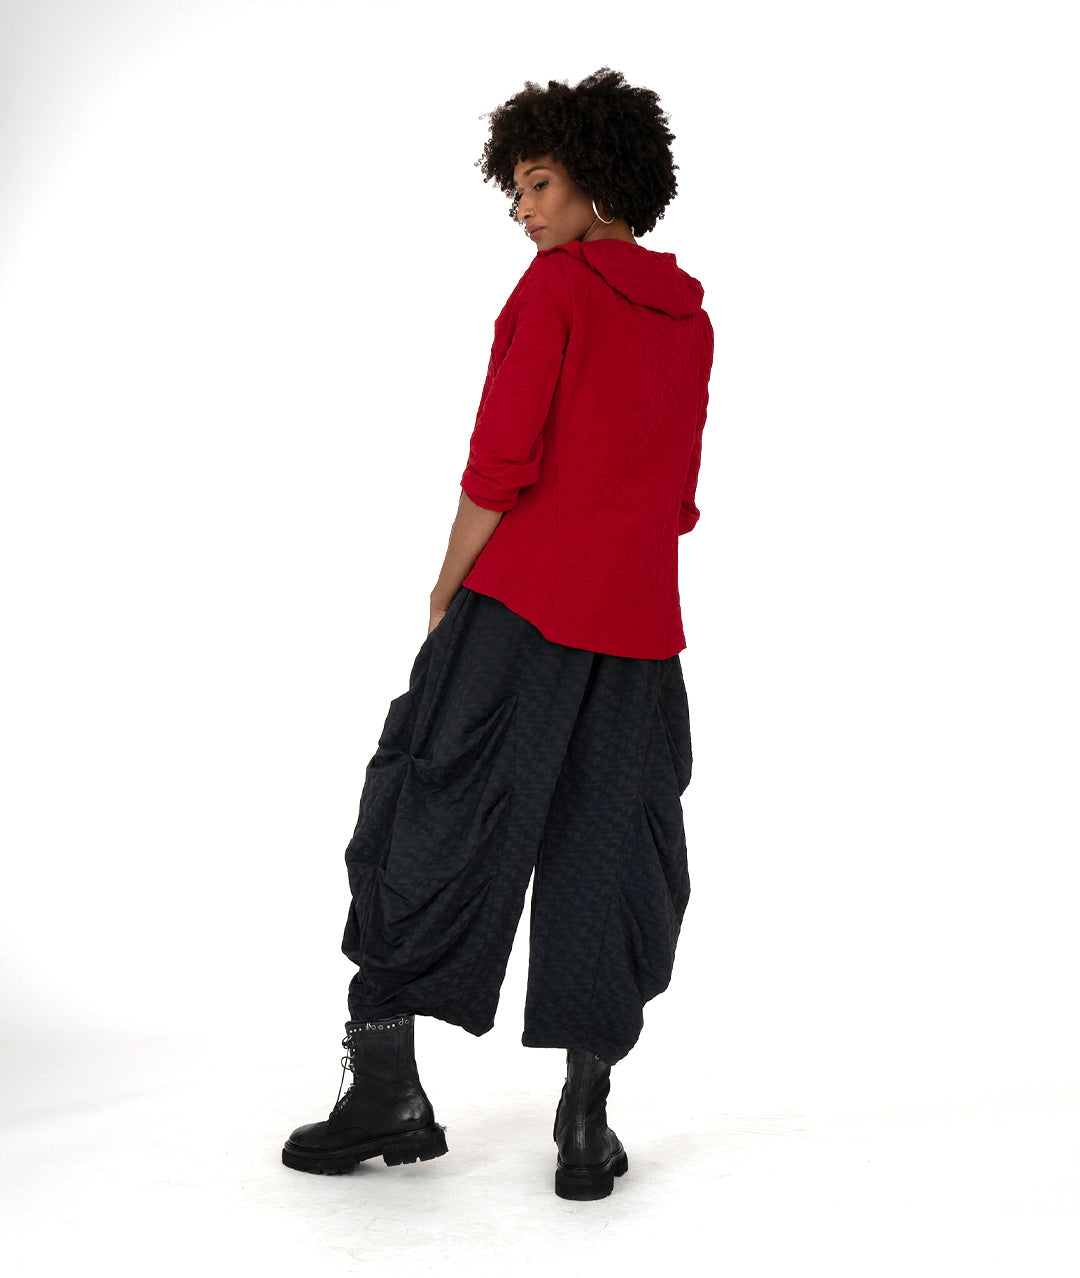 model in a wide leg black pant with a tucking detail along the legs, worn with a red jacket with a ruffled collar and a single button at the neckline